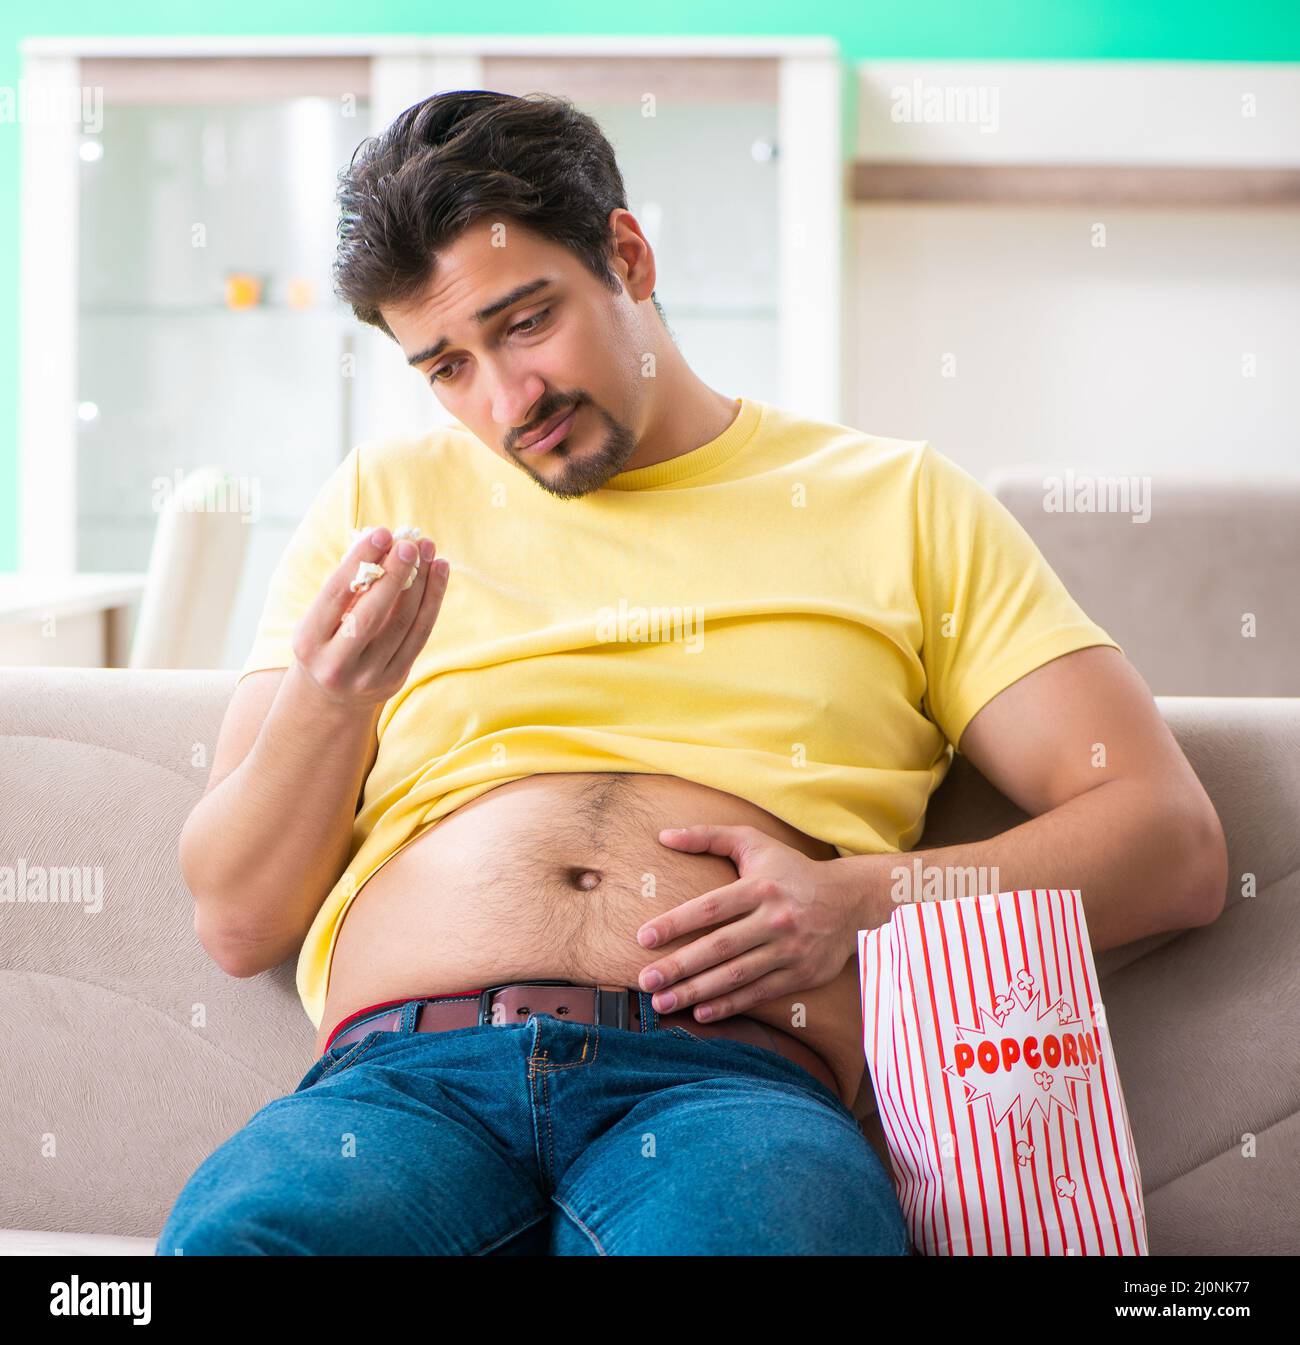 Young fat man in dieting concept Stock Photo